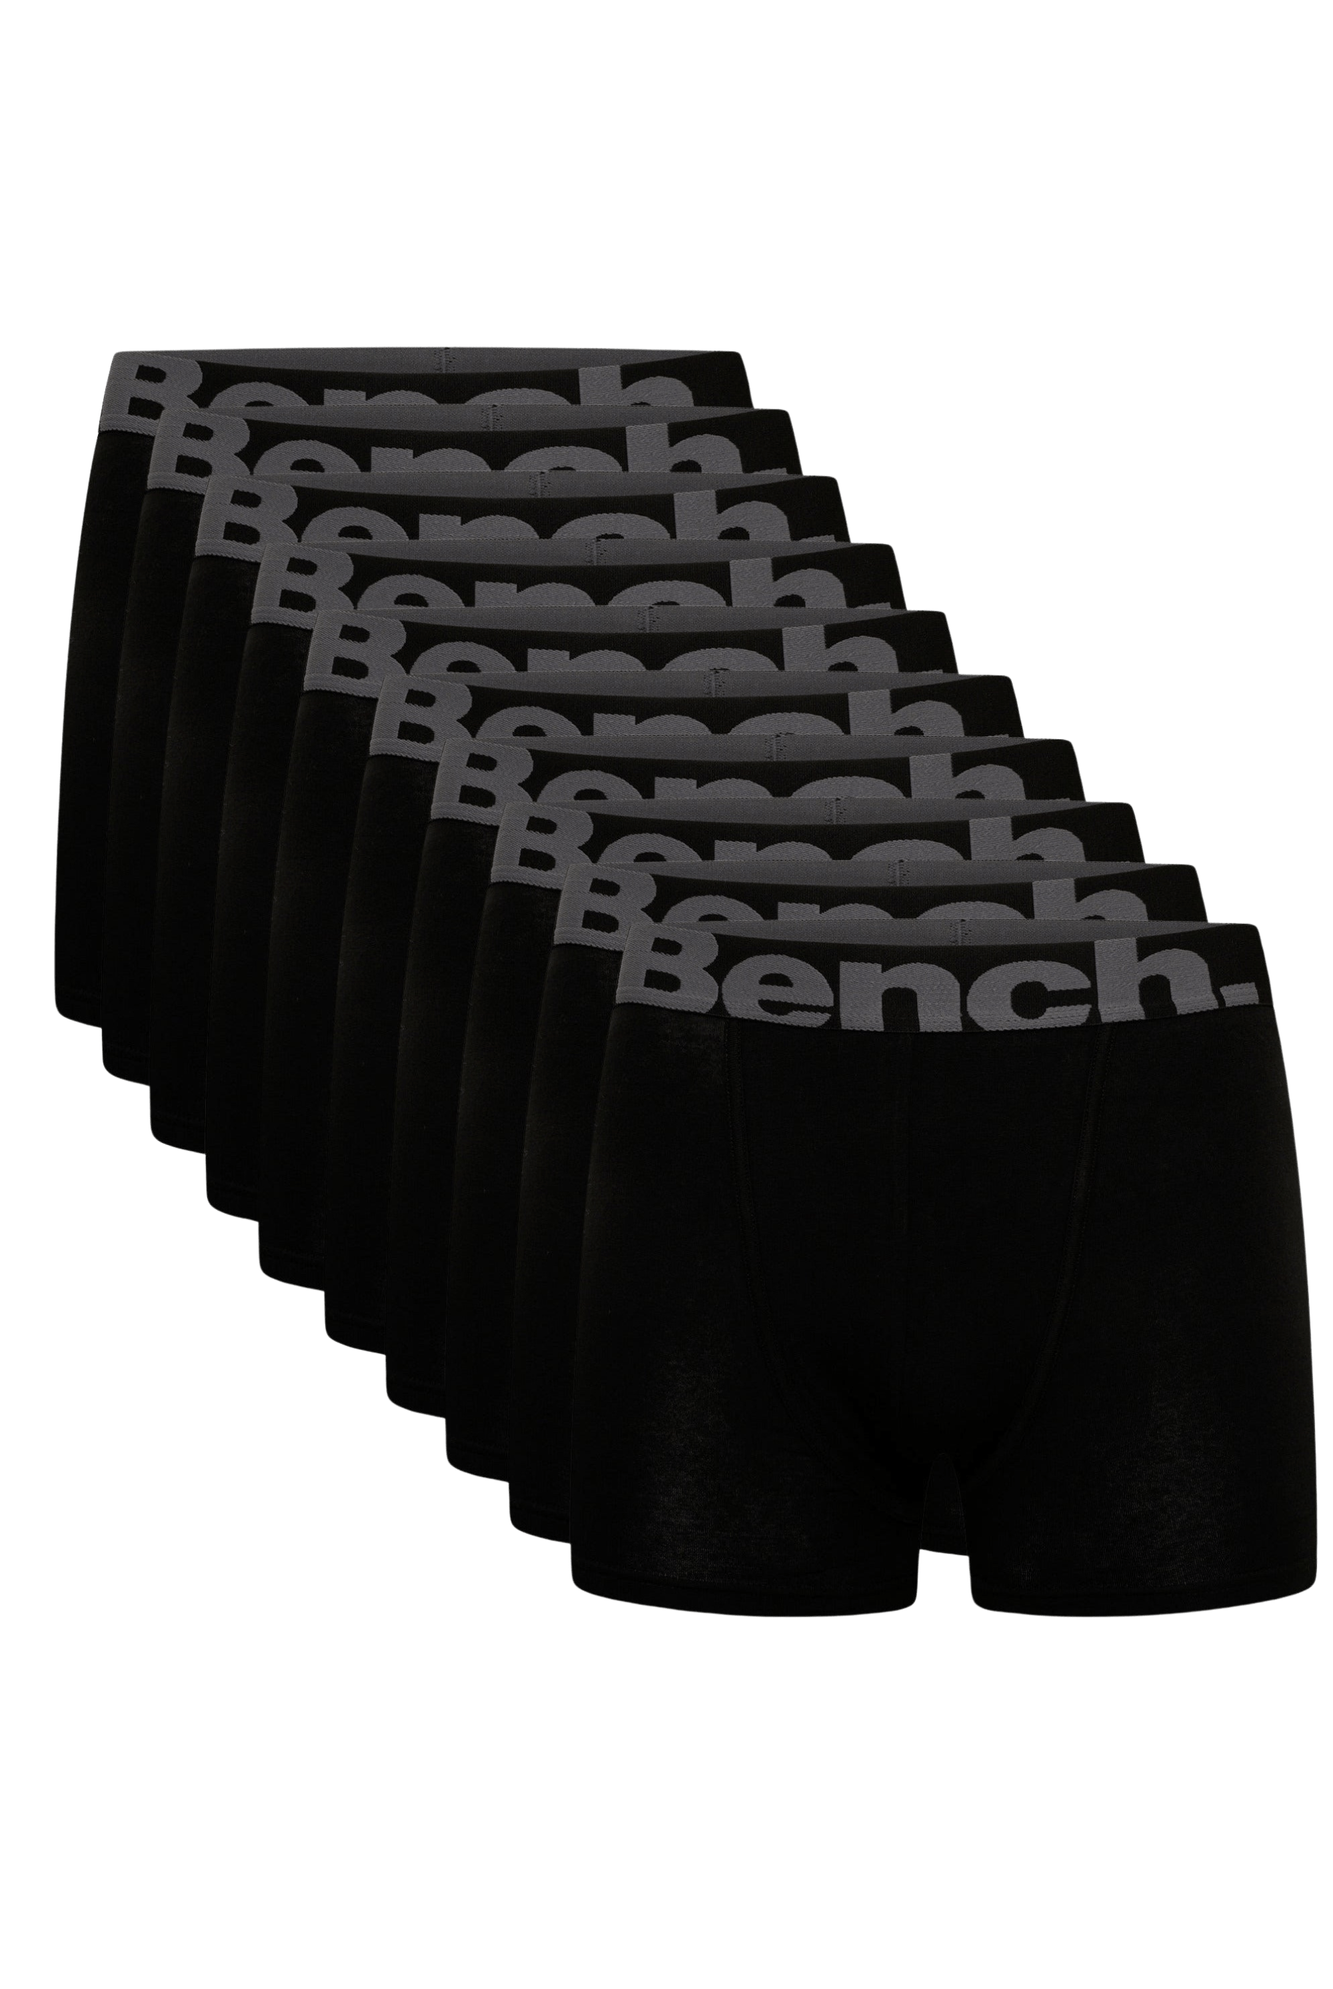 Mens 'PUTTON' 10 Pack Boxers - ASSORTED - Shop at www.Bench.co.uk #LoveMyHood